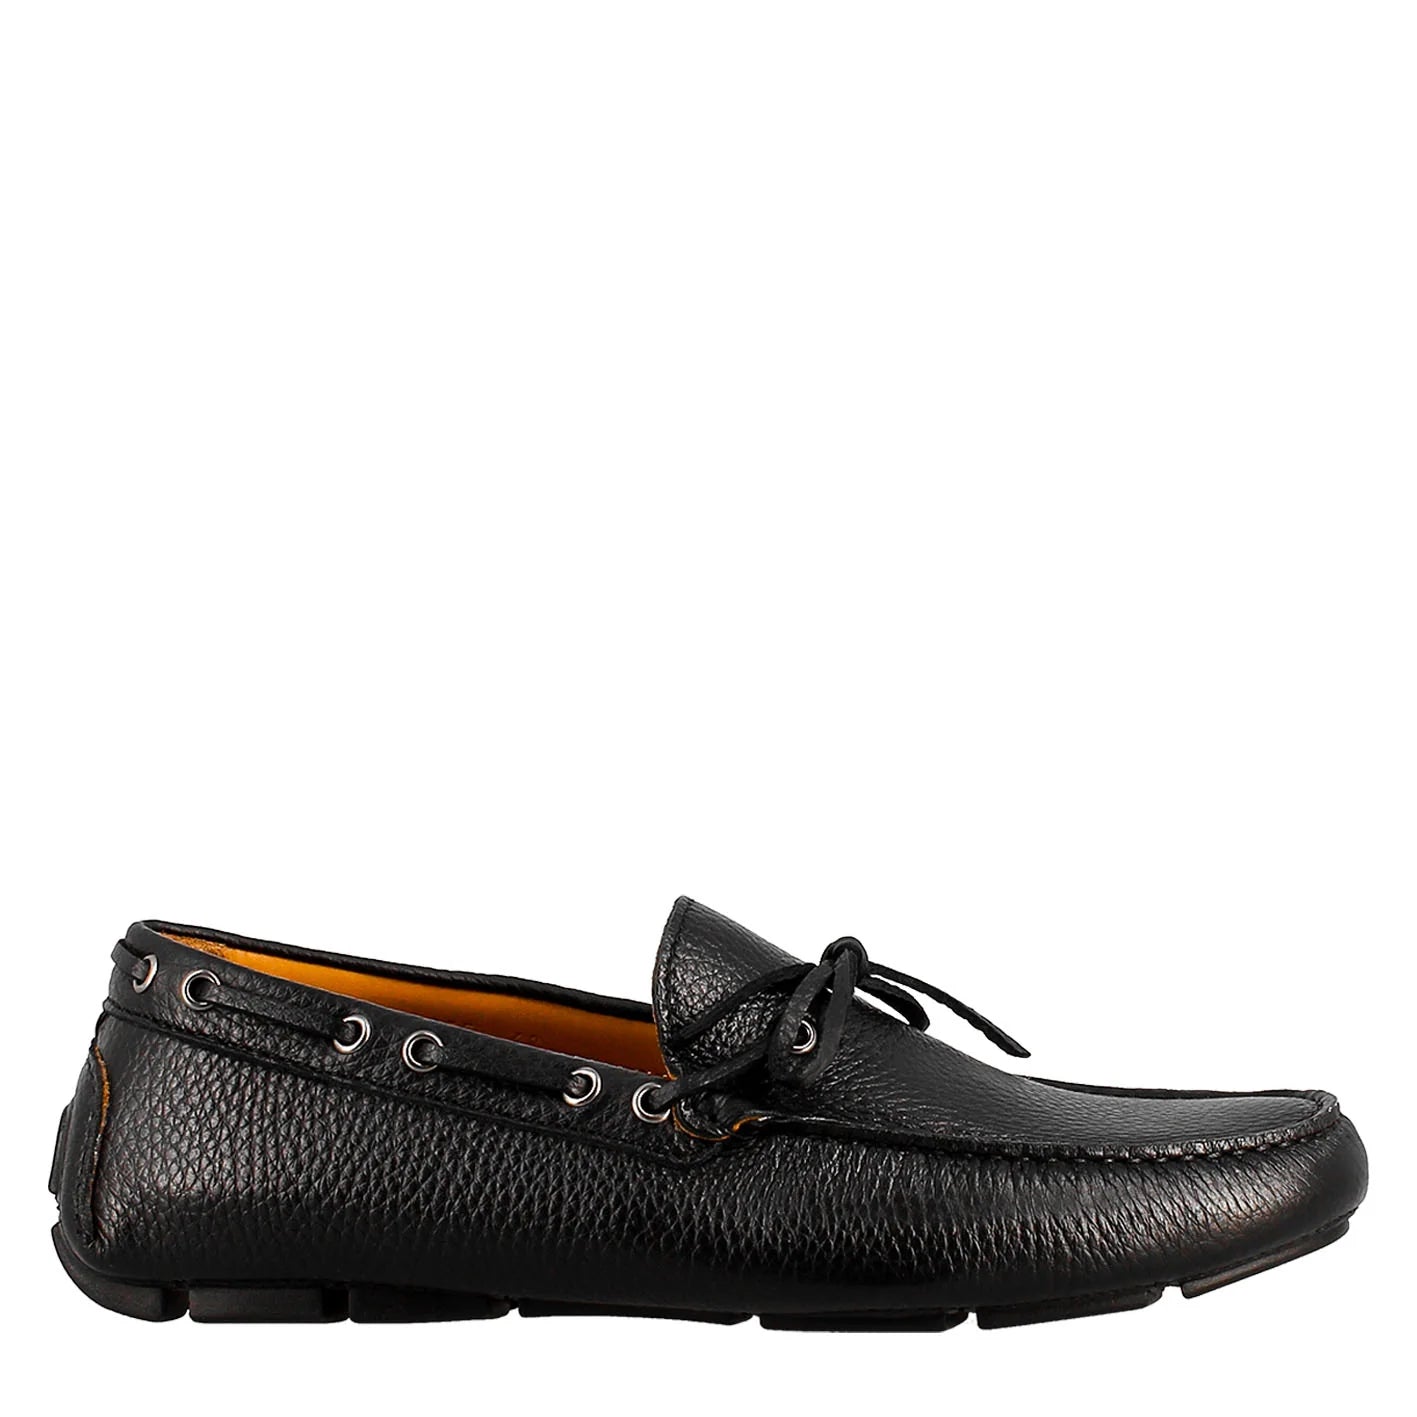 Black Leather Moccasin with Laces